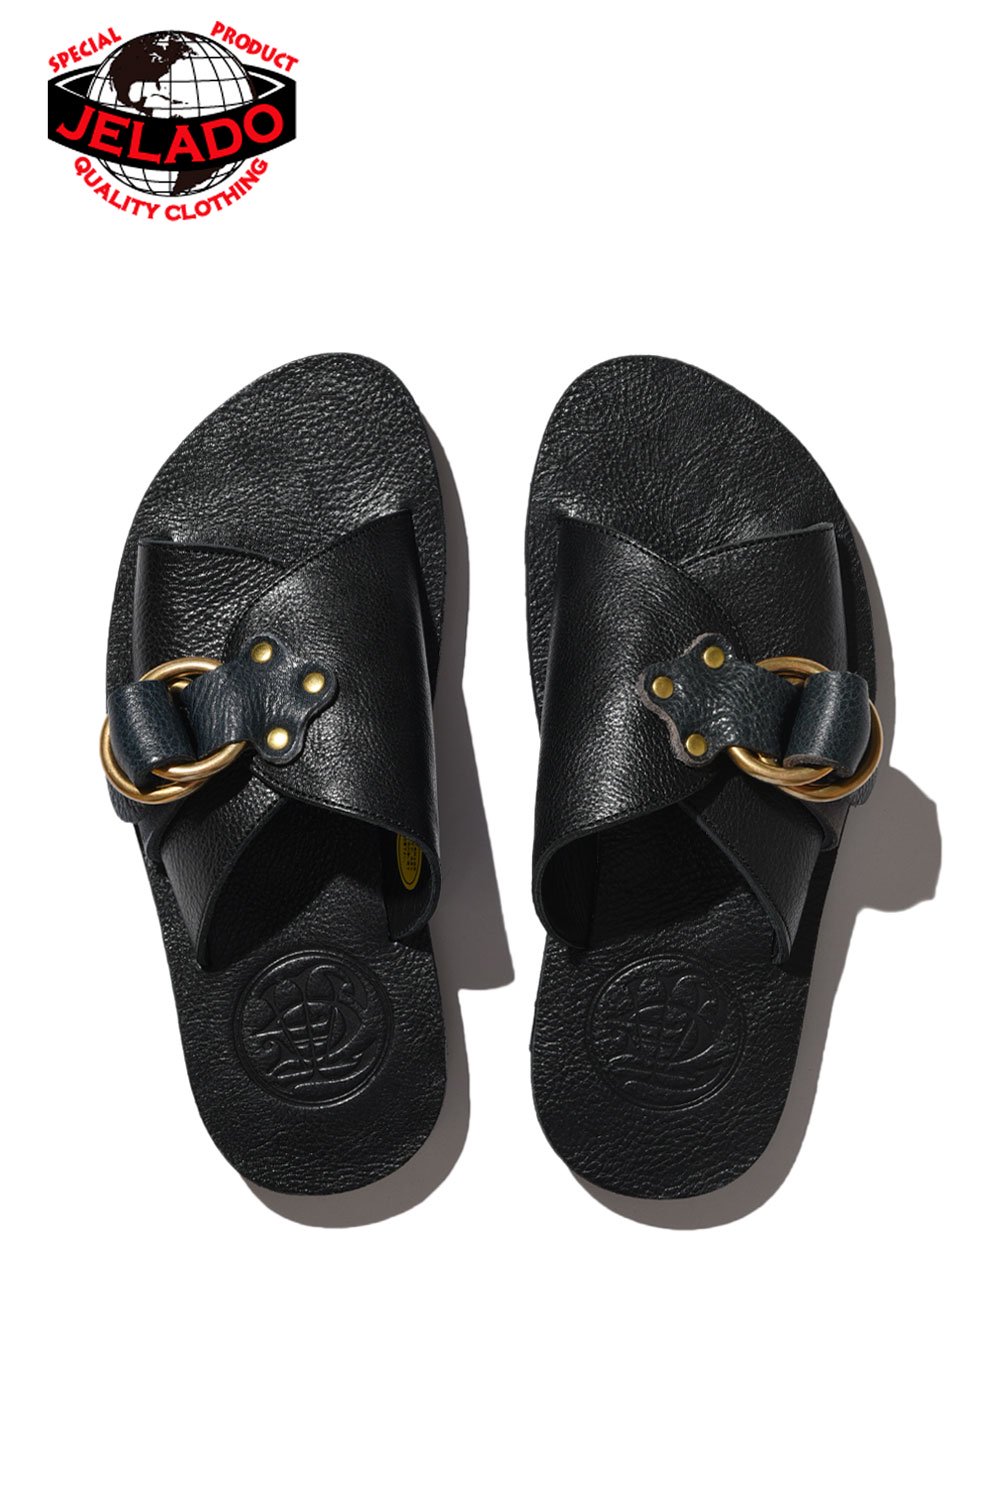 JELADO(ジェラード) サンダル LEATHER SANDALS EAST RIVER AG22924 通販正規取扱 |  ハーレムストア公式通販サイト